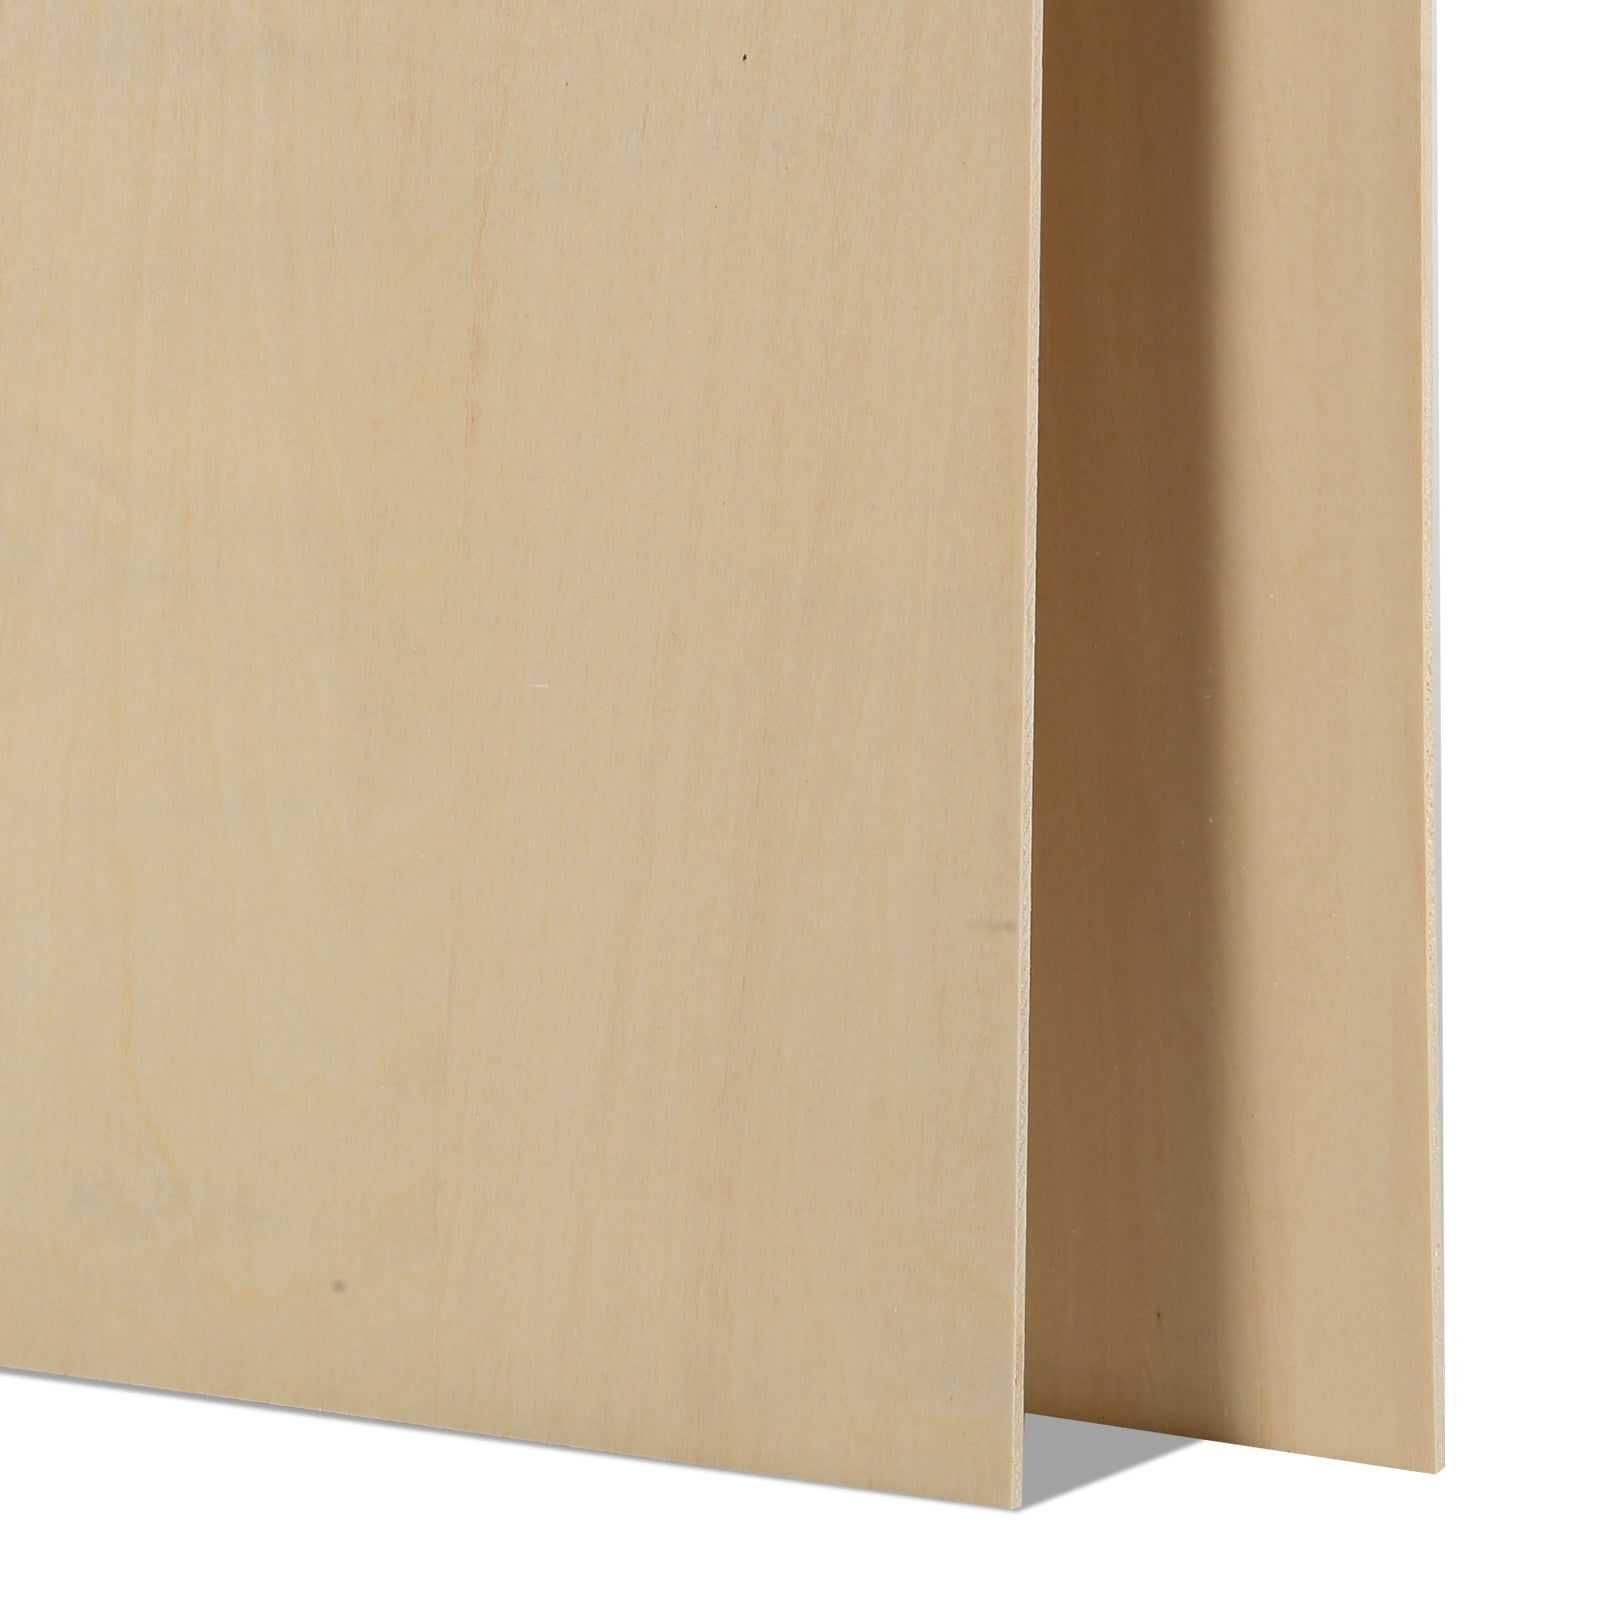 10pcs A4 Plywood Sheets 3mm Thickness (+/- 0.2mm) Basswood Plywood 21x29.7x0.3cm for Engraving